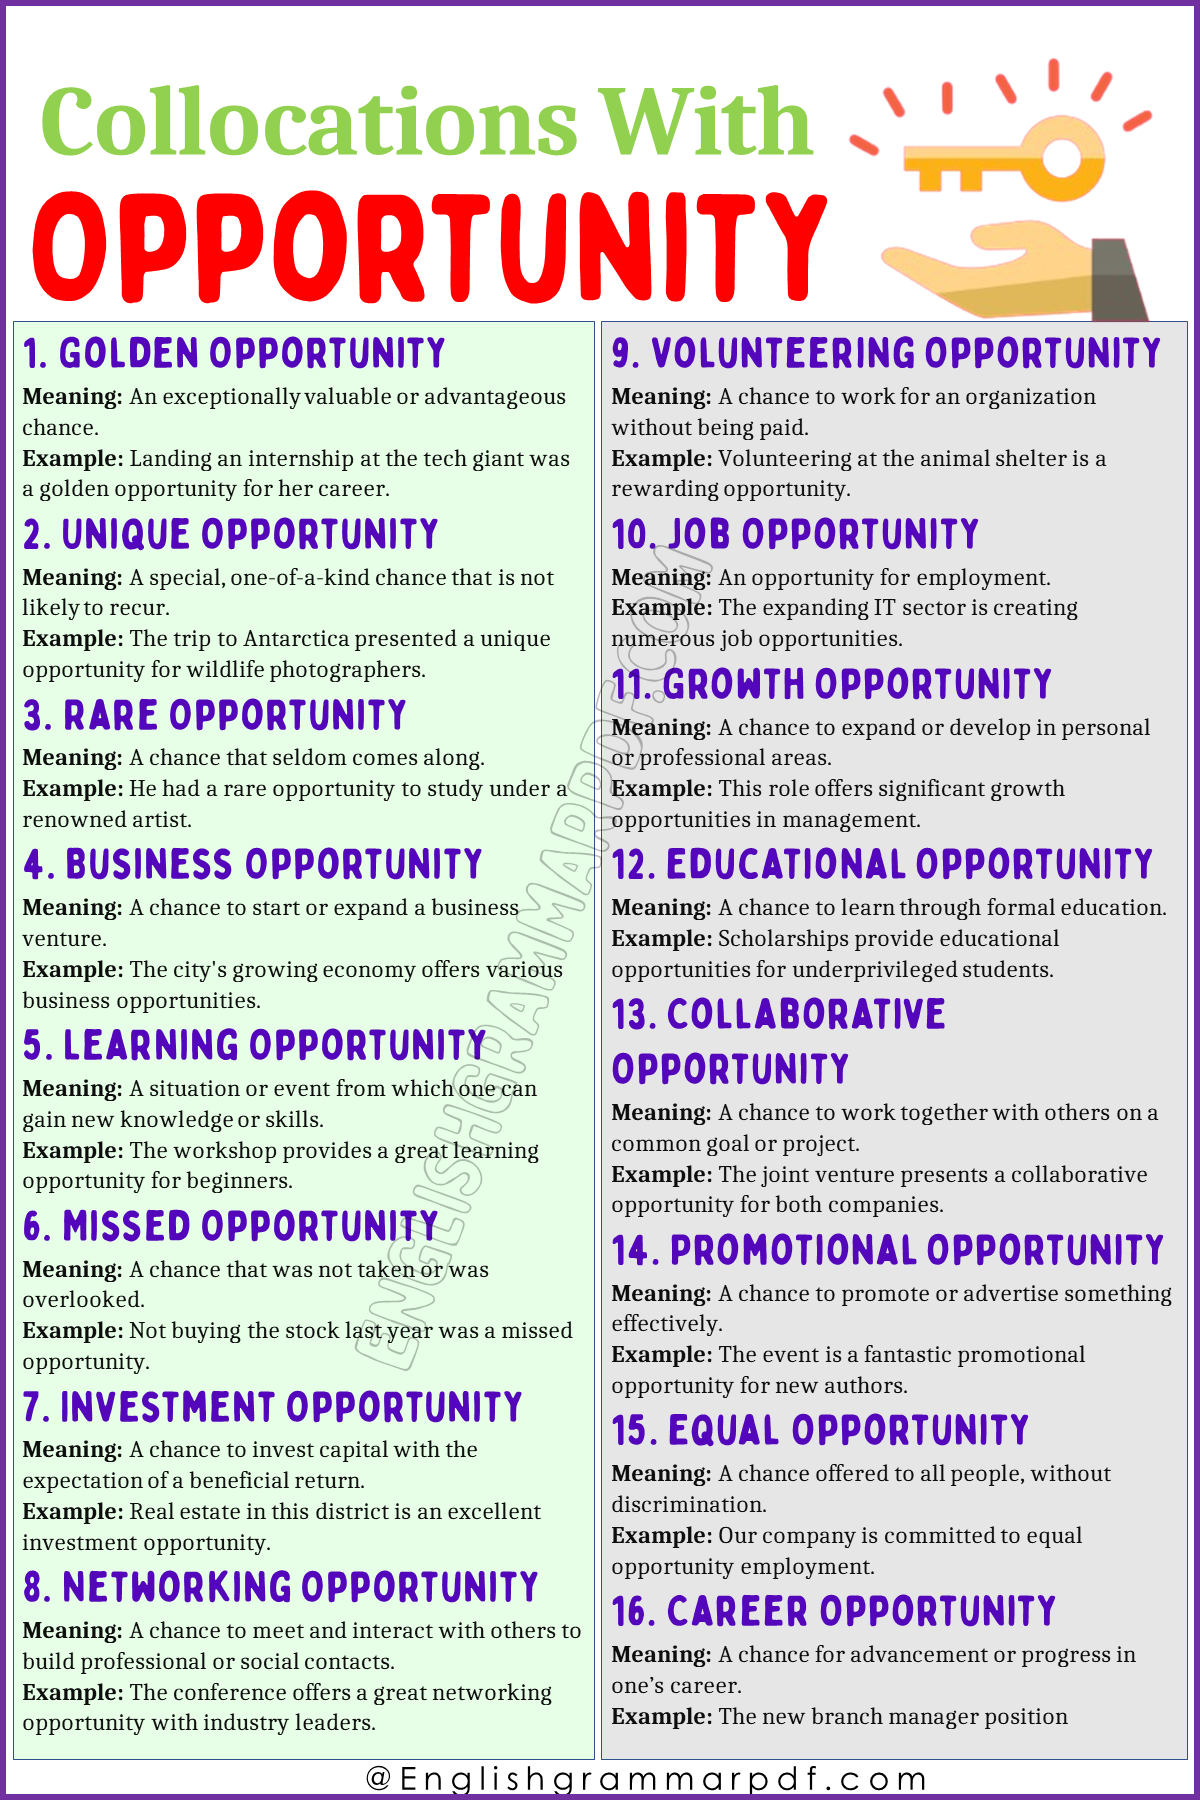 Collocations with Opportunity